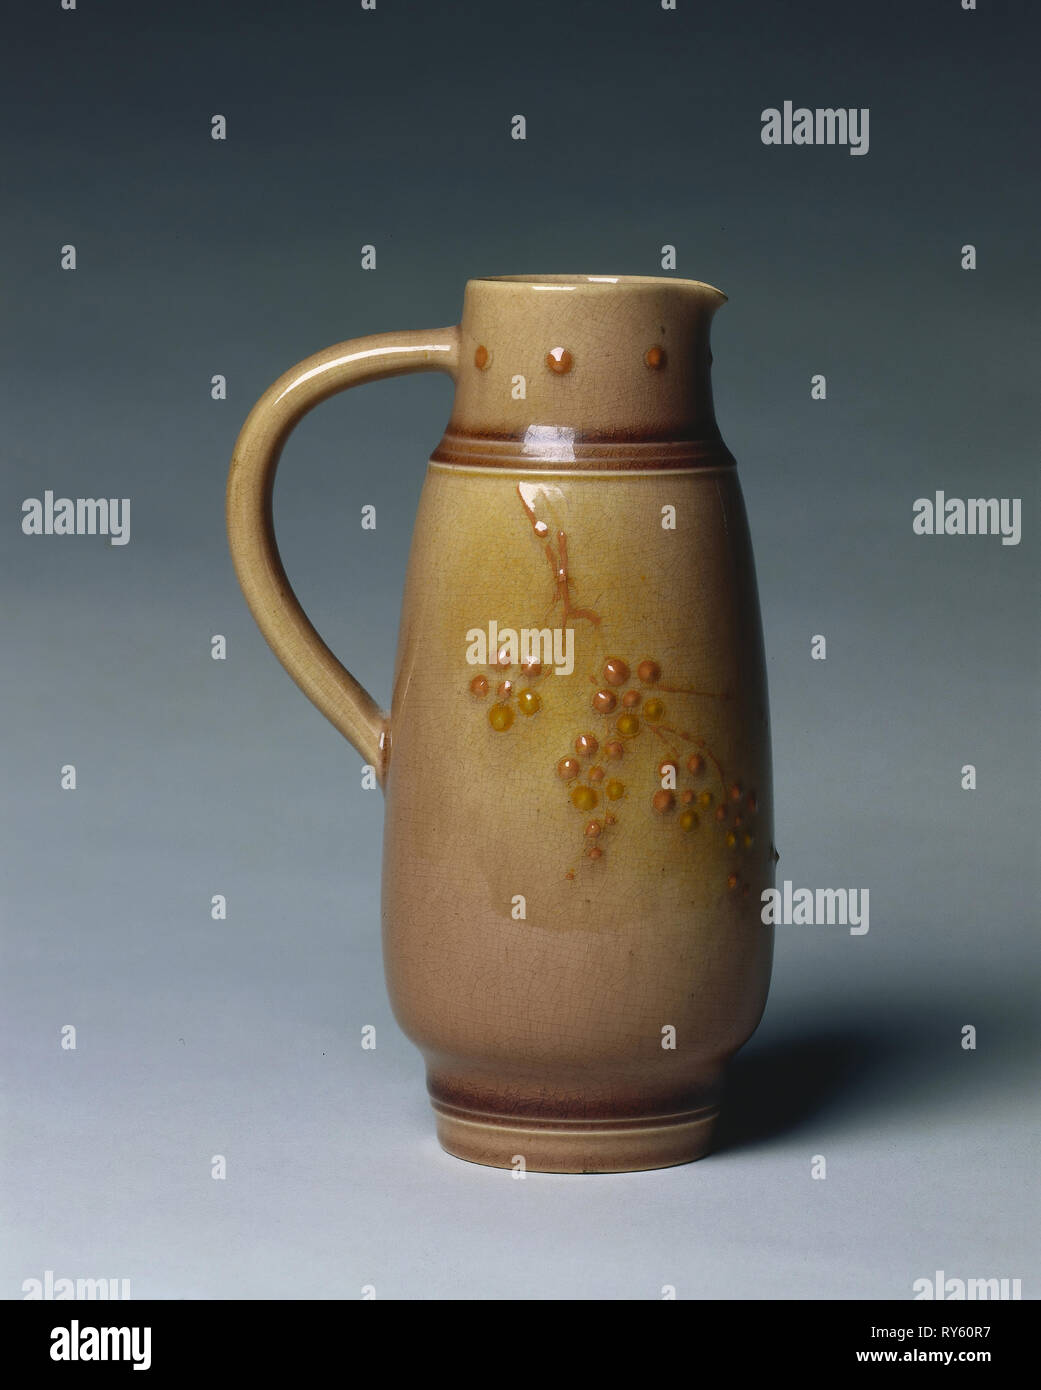 Small Pitcher, 1885. Martin Rettig (American, 1869-1956), Rookwood Pottery Company (American, established 1880). Earthenware; overall: 13.8 x 9 cm (5 7/16 x 3 9/16 in Stock Photo